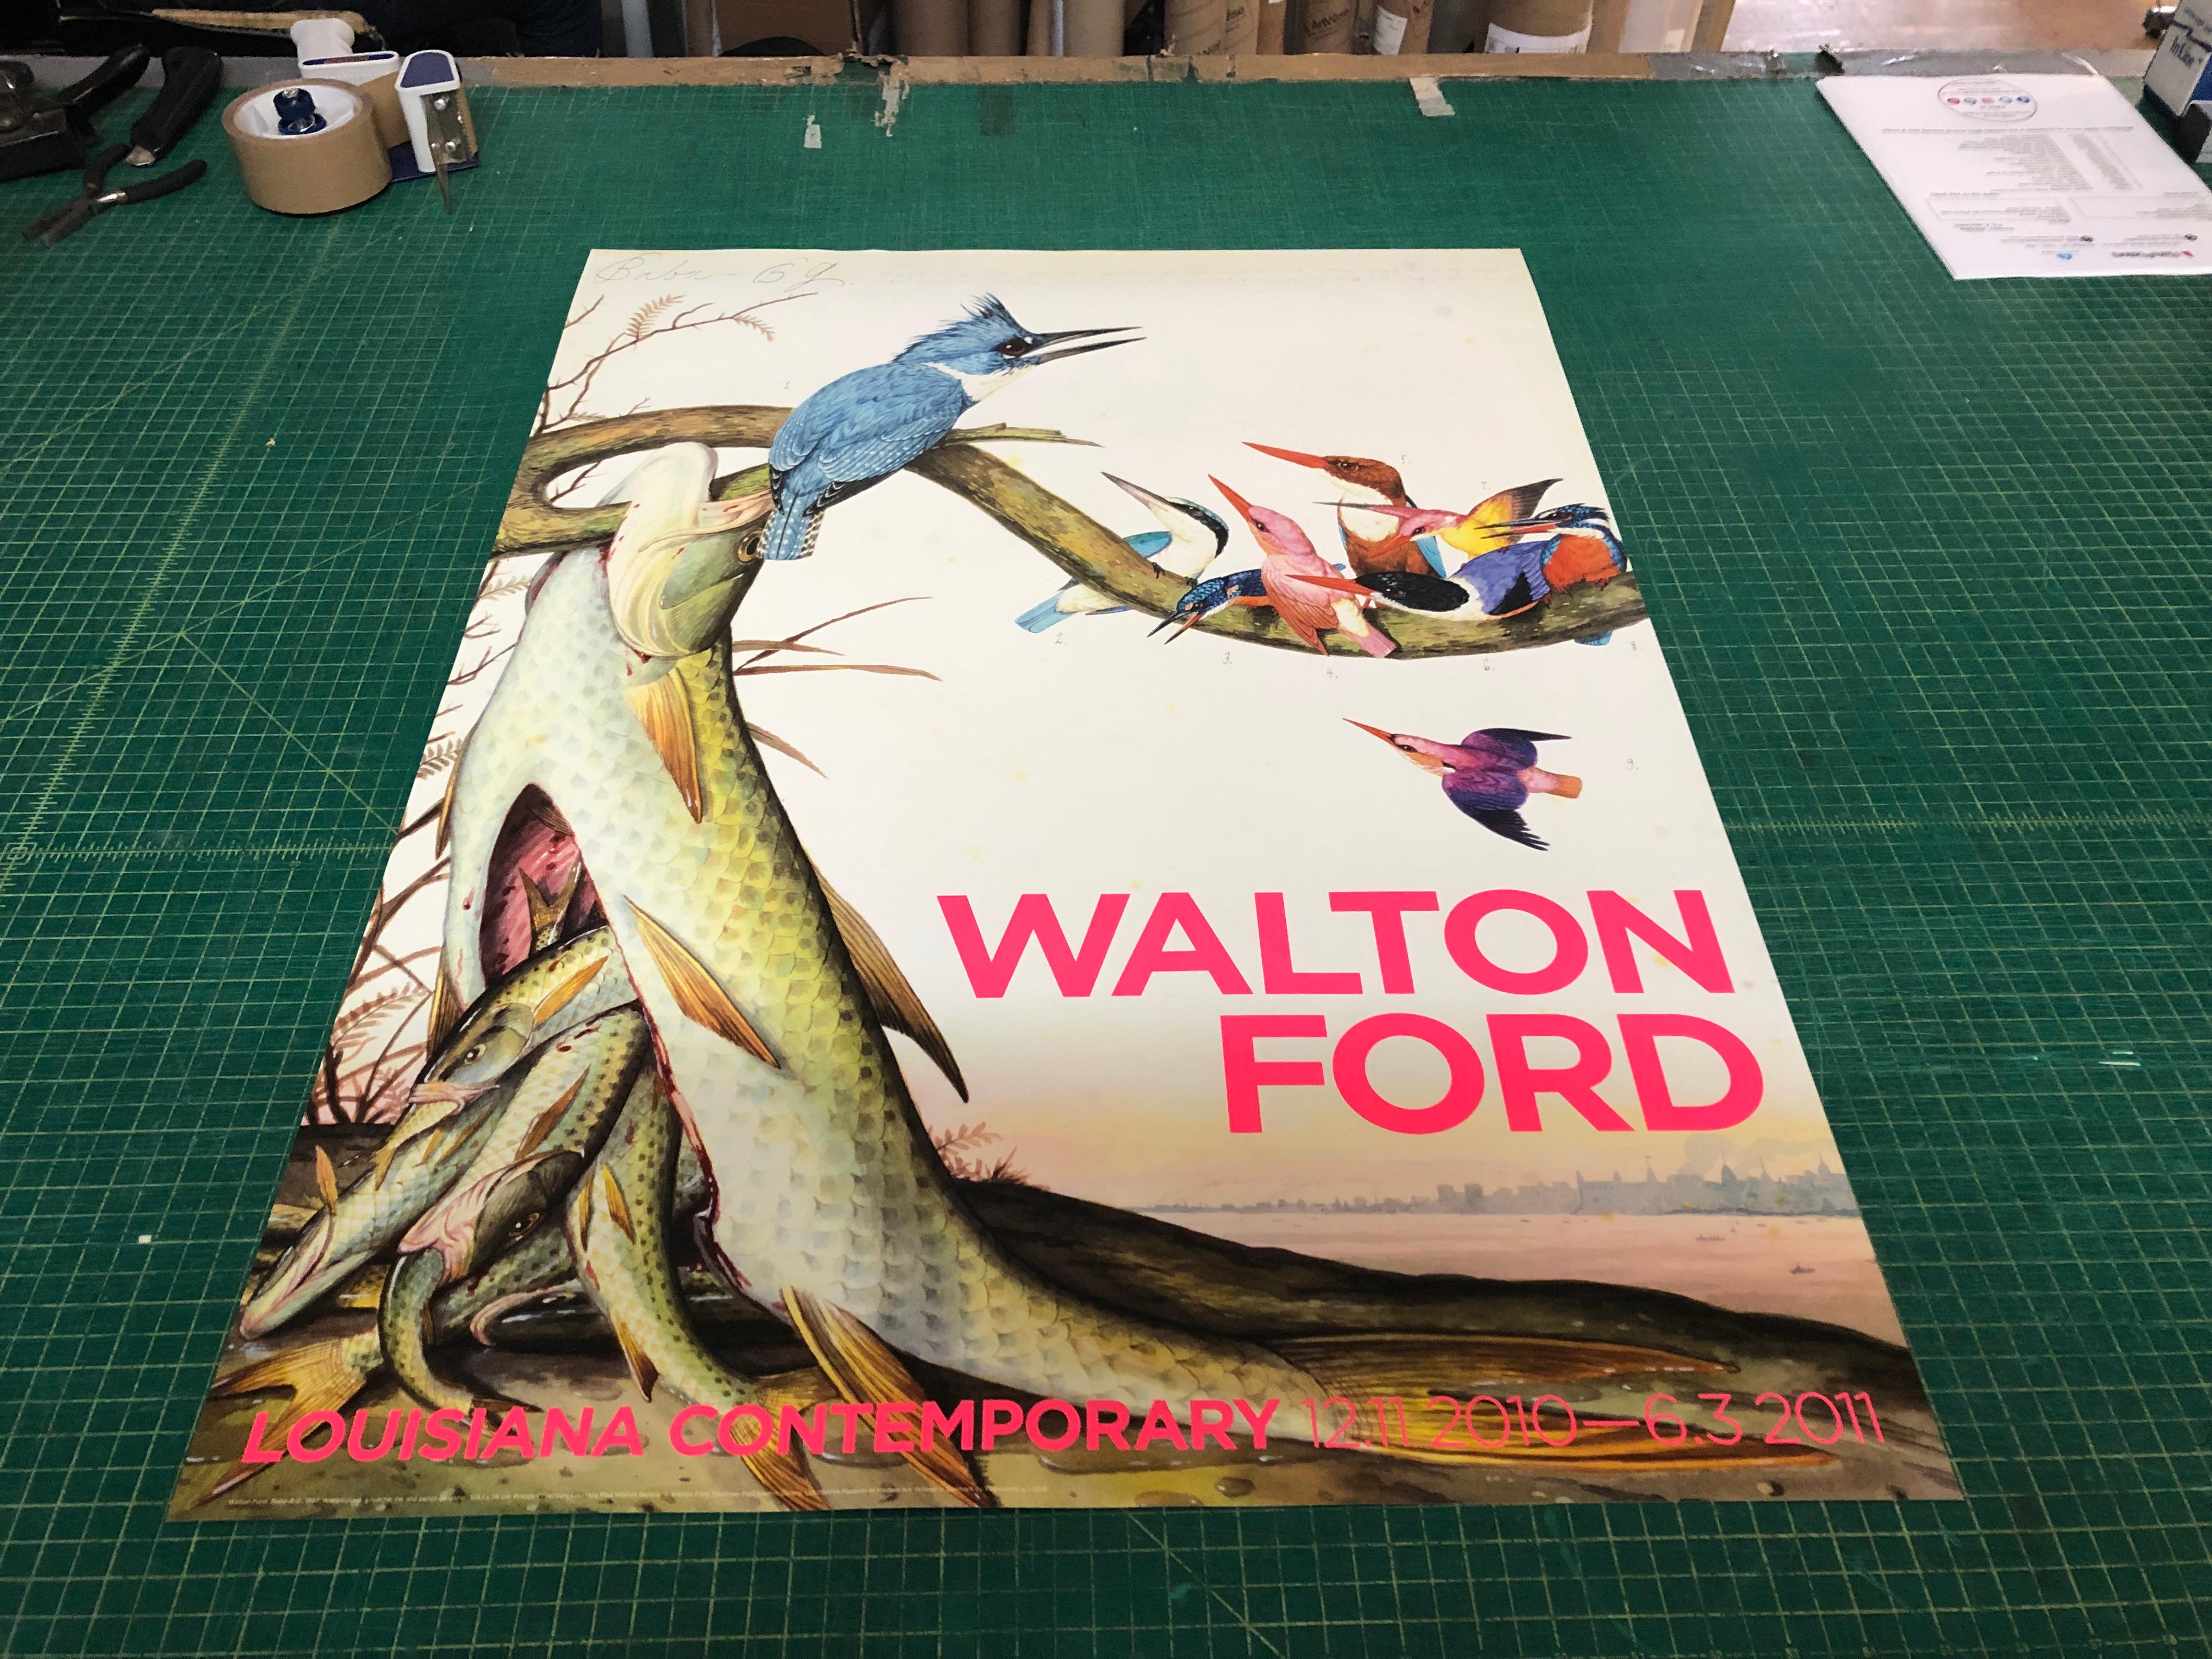 Ford Walton 15 For Sale on 1stDibs ford poster, walton ford prints for sale, plakat walton ford